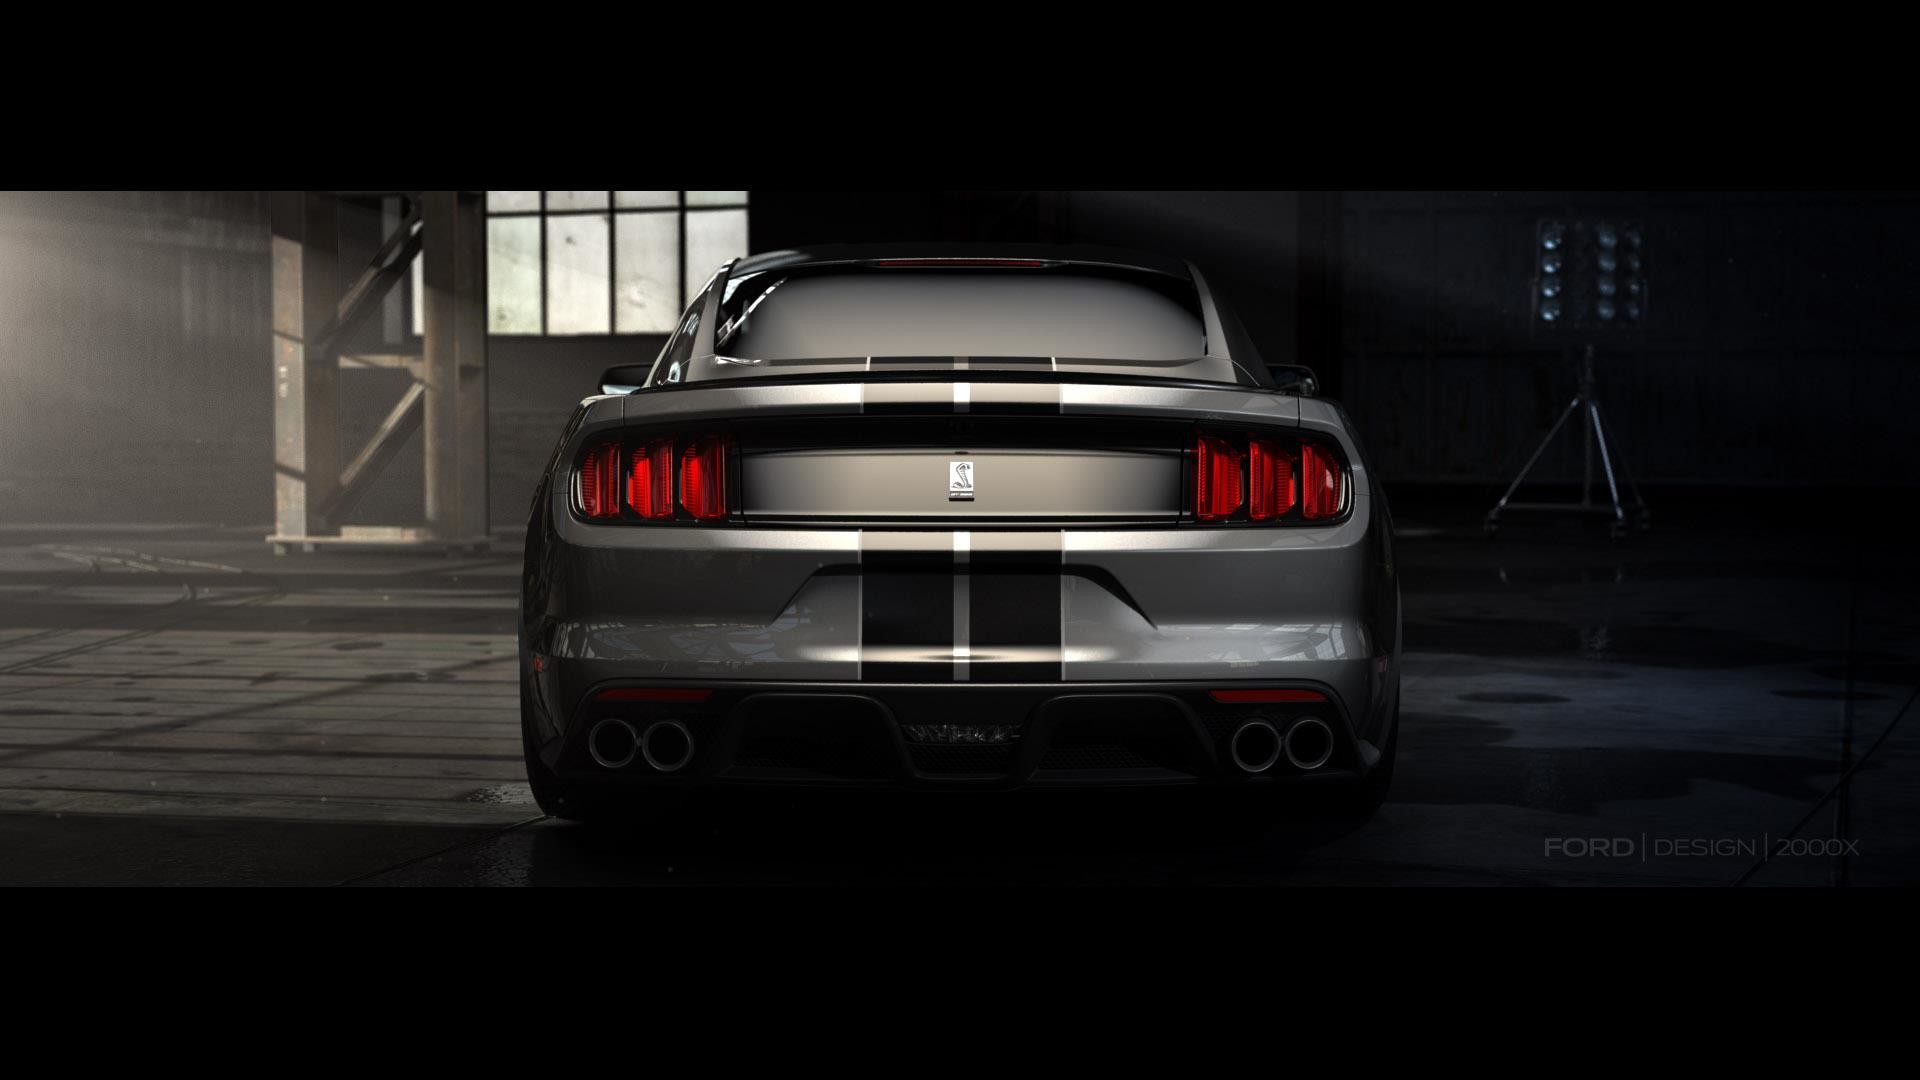 1920x1080 arrow_downward. 2016 Ford Mustang Shelby GT350 Wallpapers